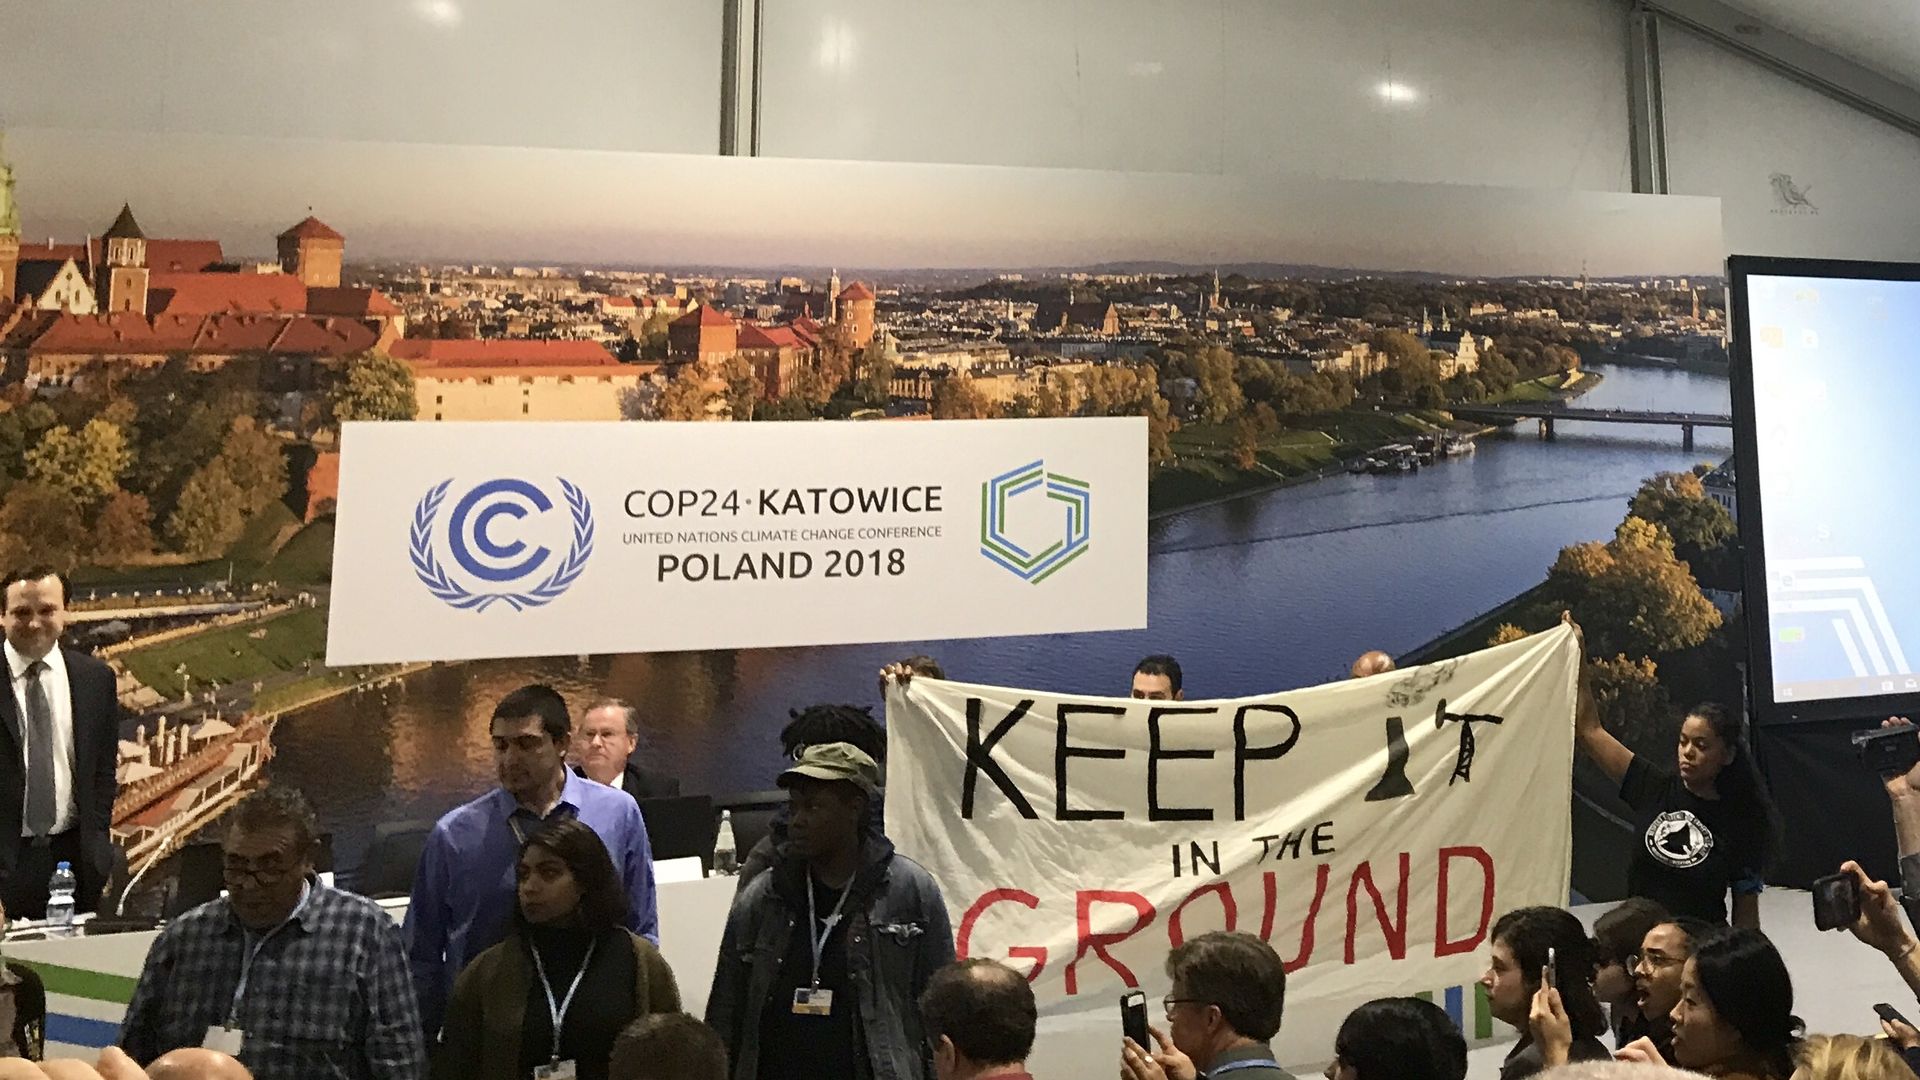 Protesters disrupt Trump administration fossil fuels event at climate conference Monday in Poland.